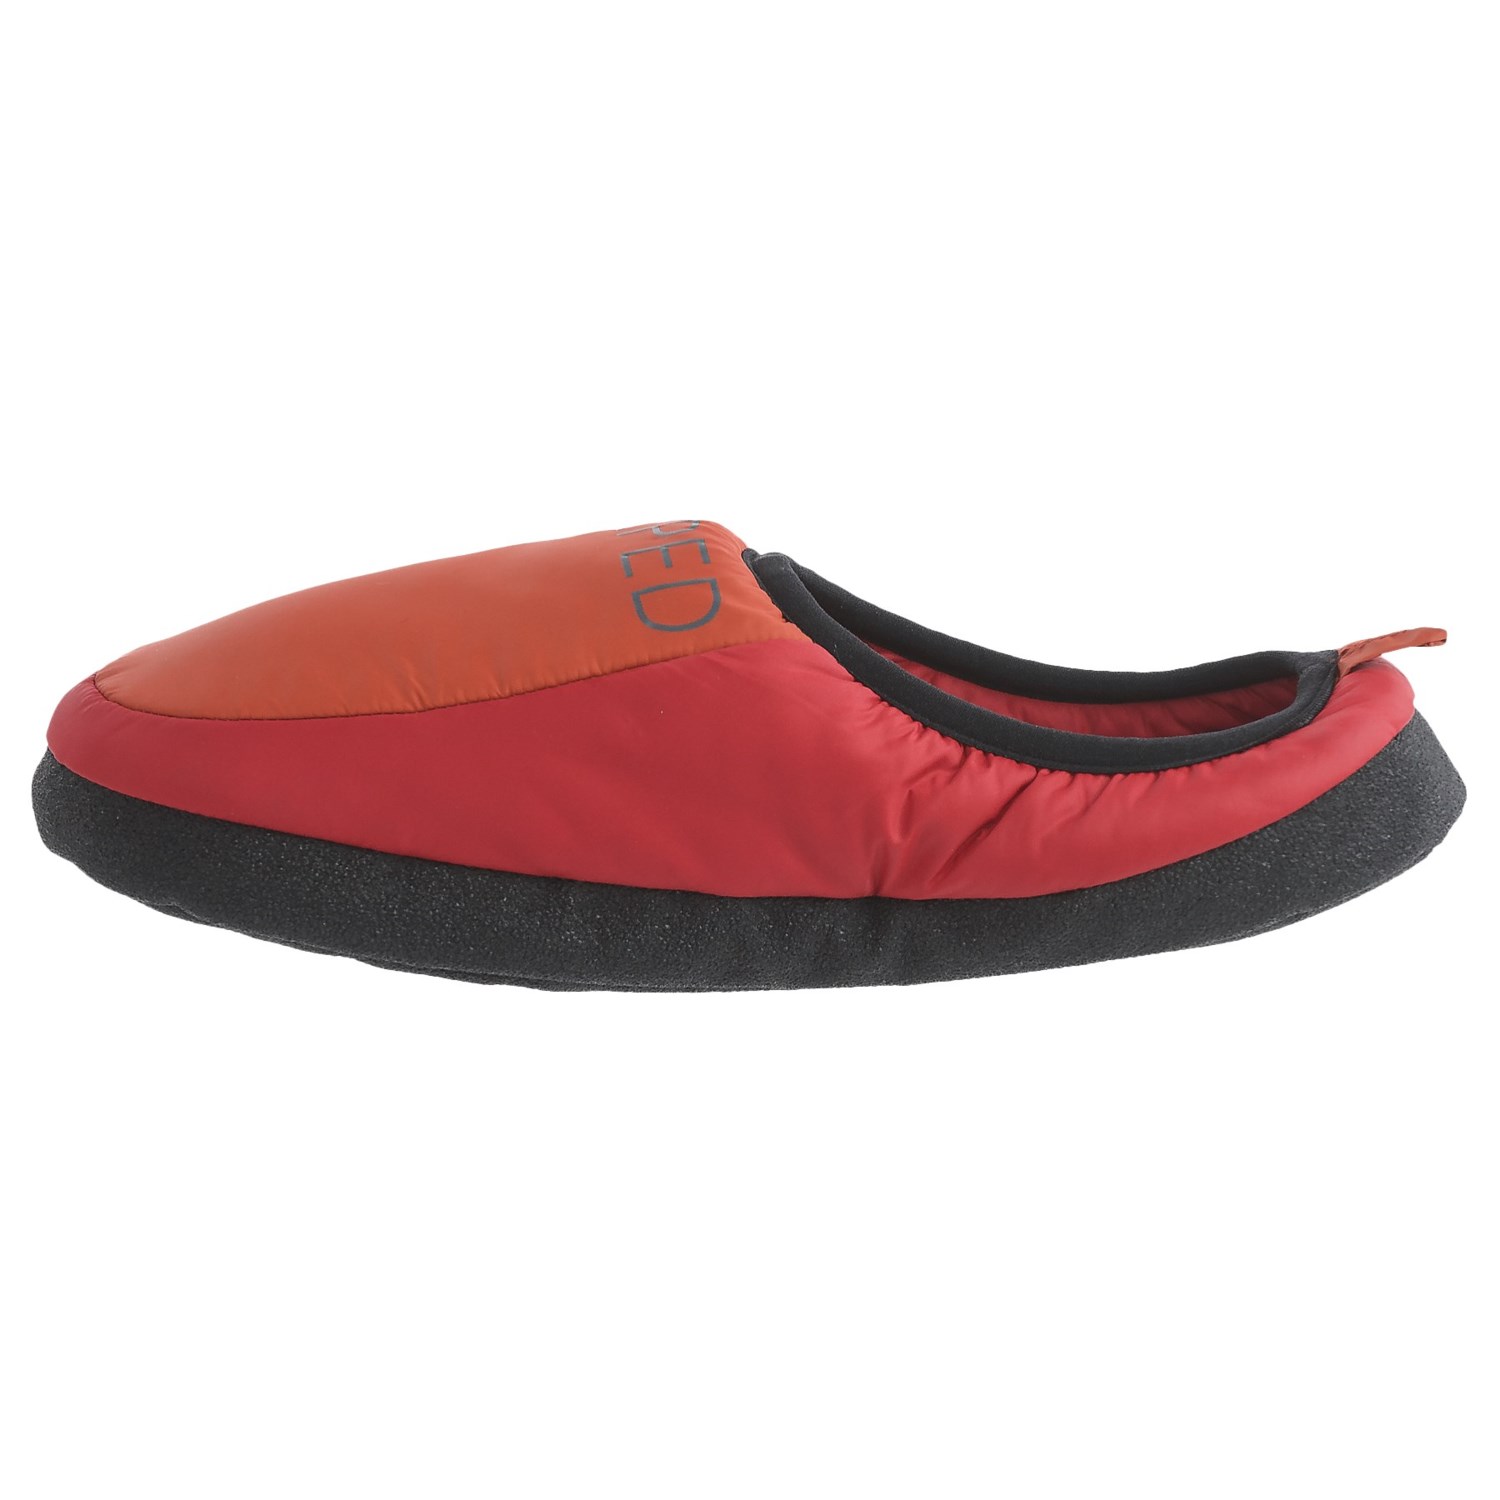 Exped Camp Slippers (For Men and Women) - Save 61%